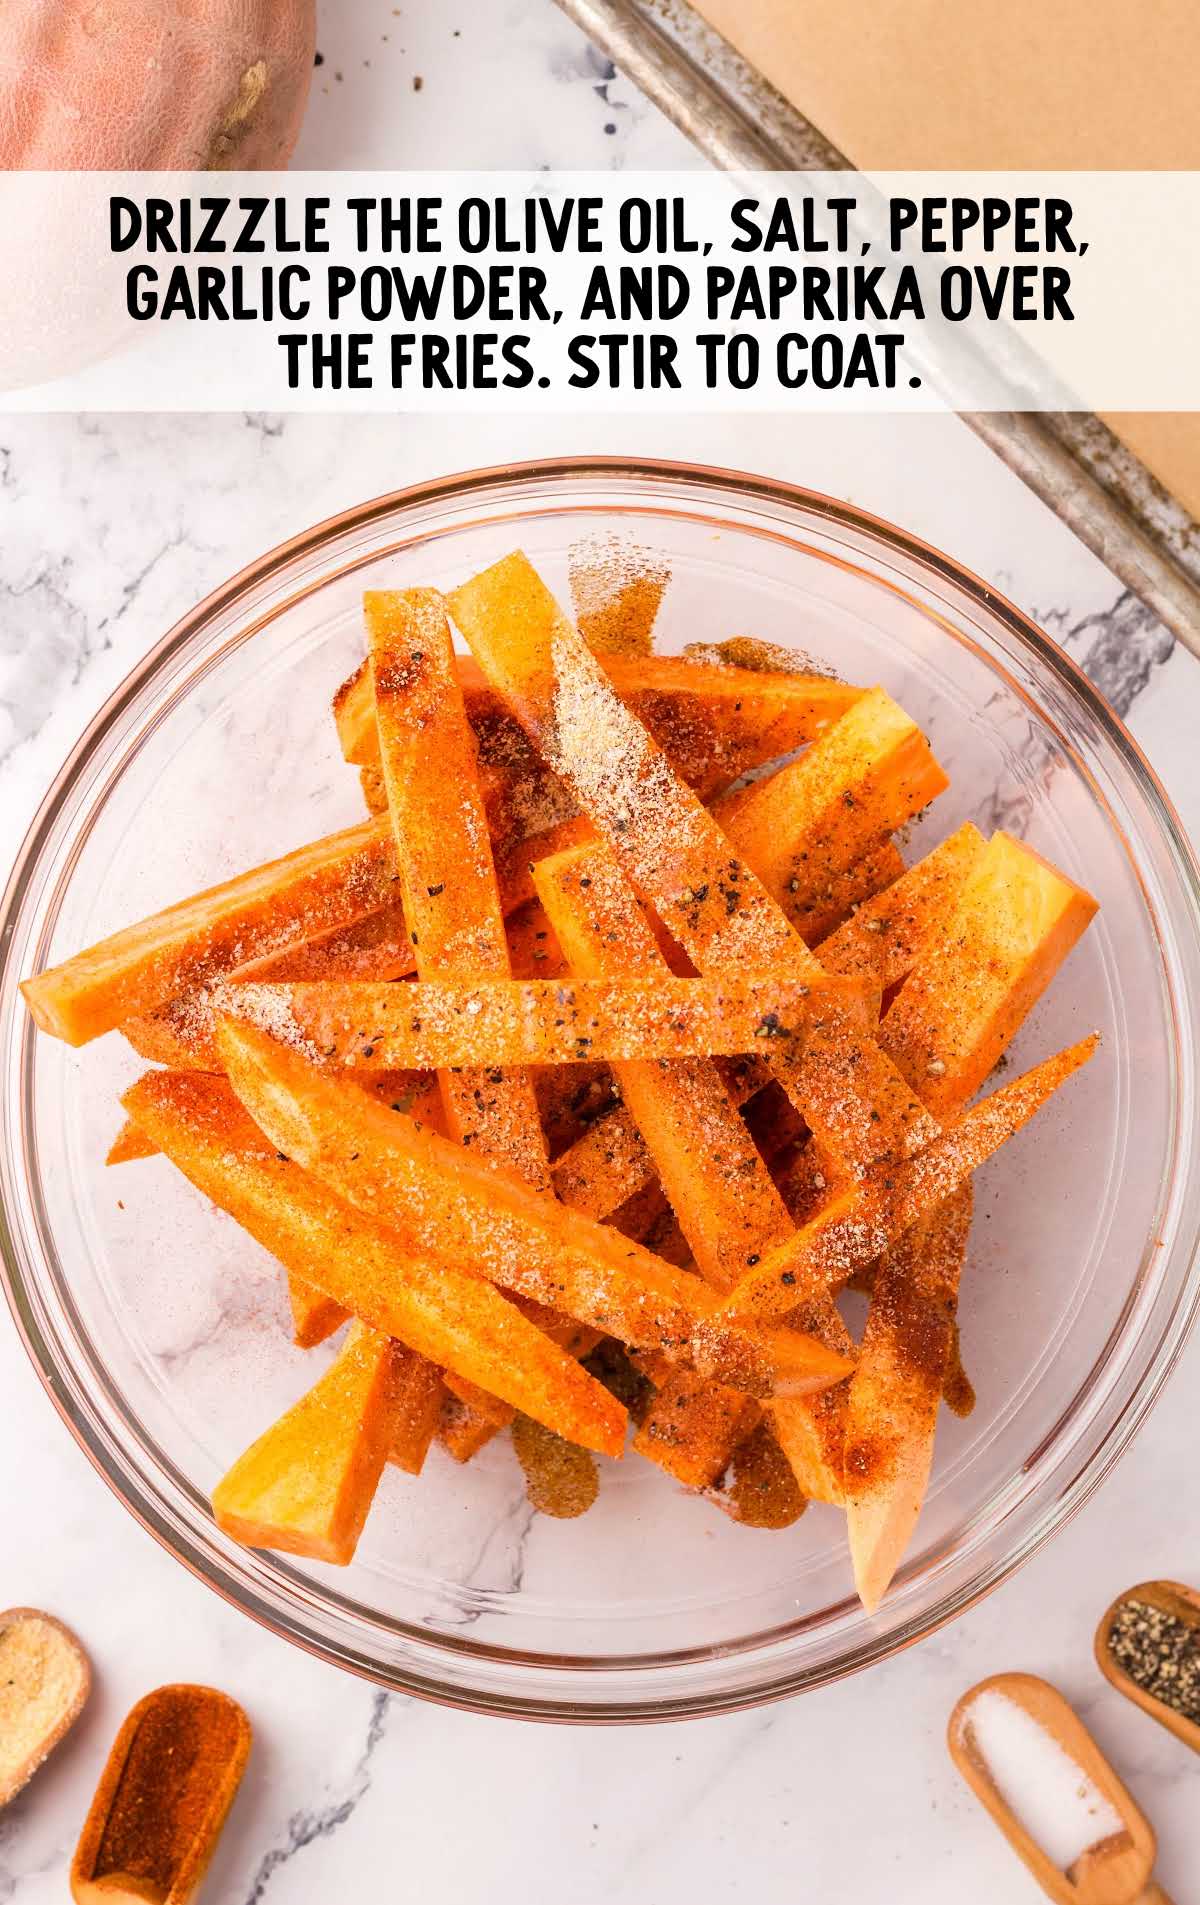 olive oil. salt, pepper, garlic powder, and paprika drizzled over the fries.